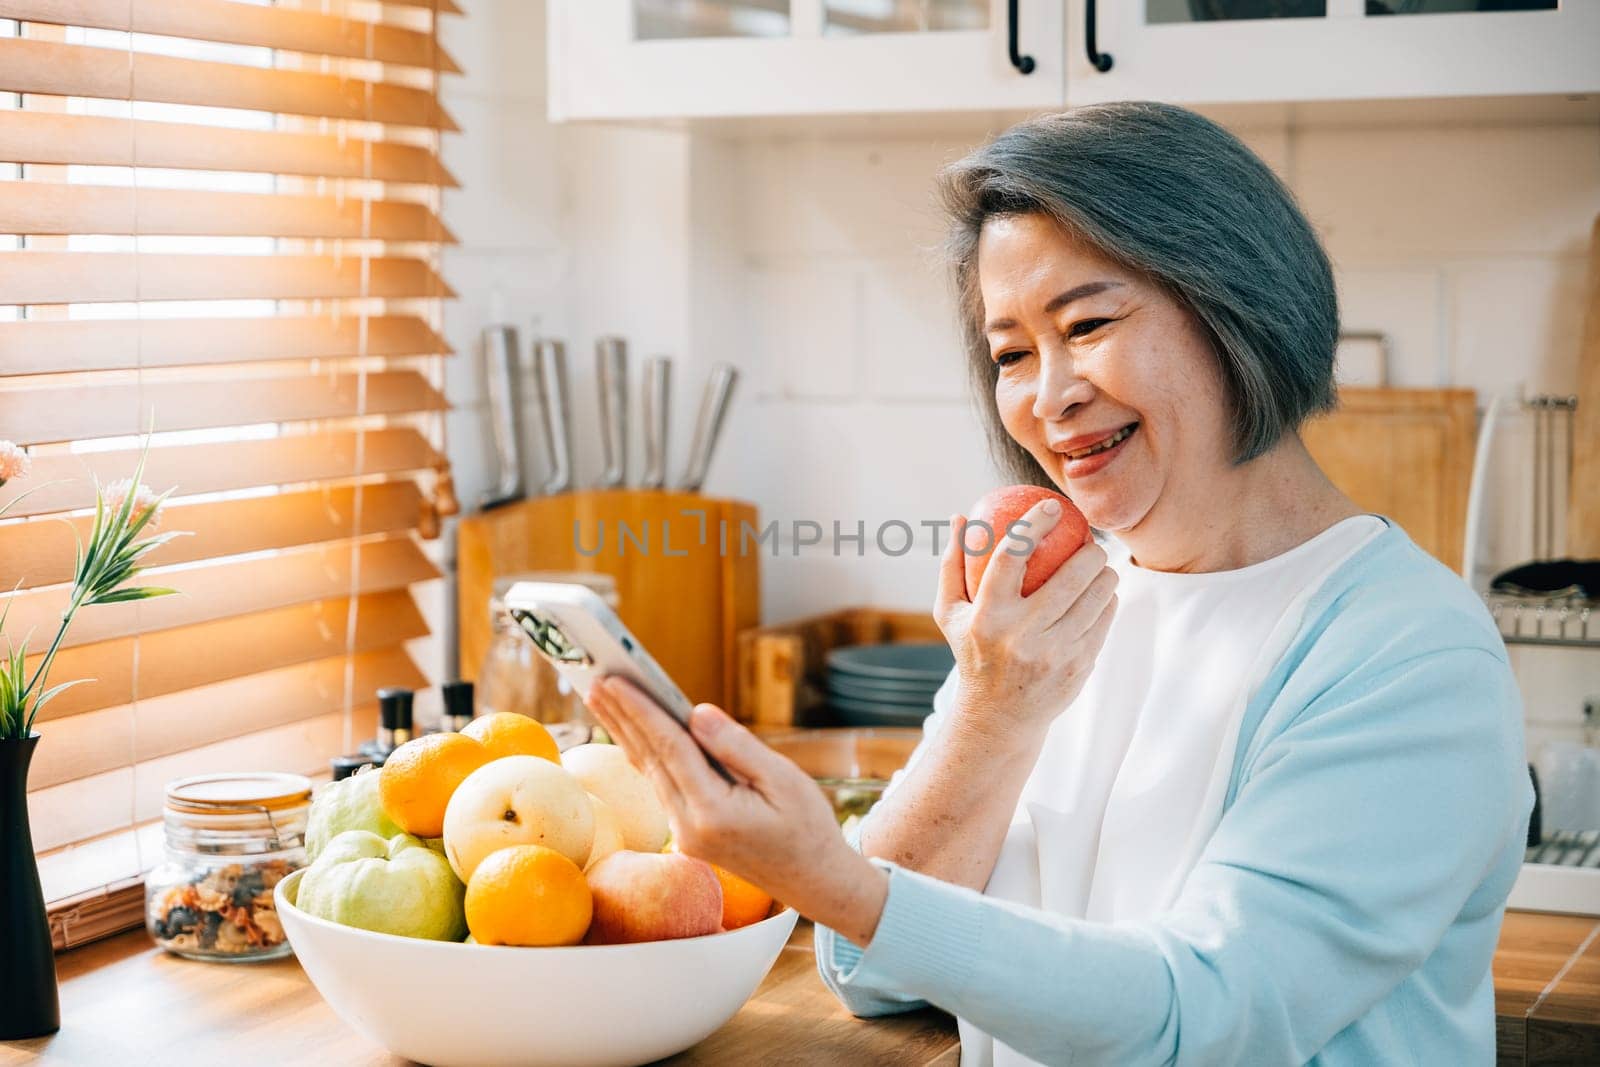 In the kitchen, an old woman, a grandmother, savors breakfast. She's smiling, using her smartphone, and munching on a red apple. A portrayal of technology, happiness, and care at home.